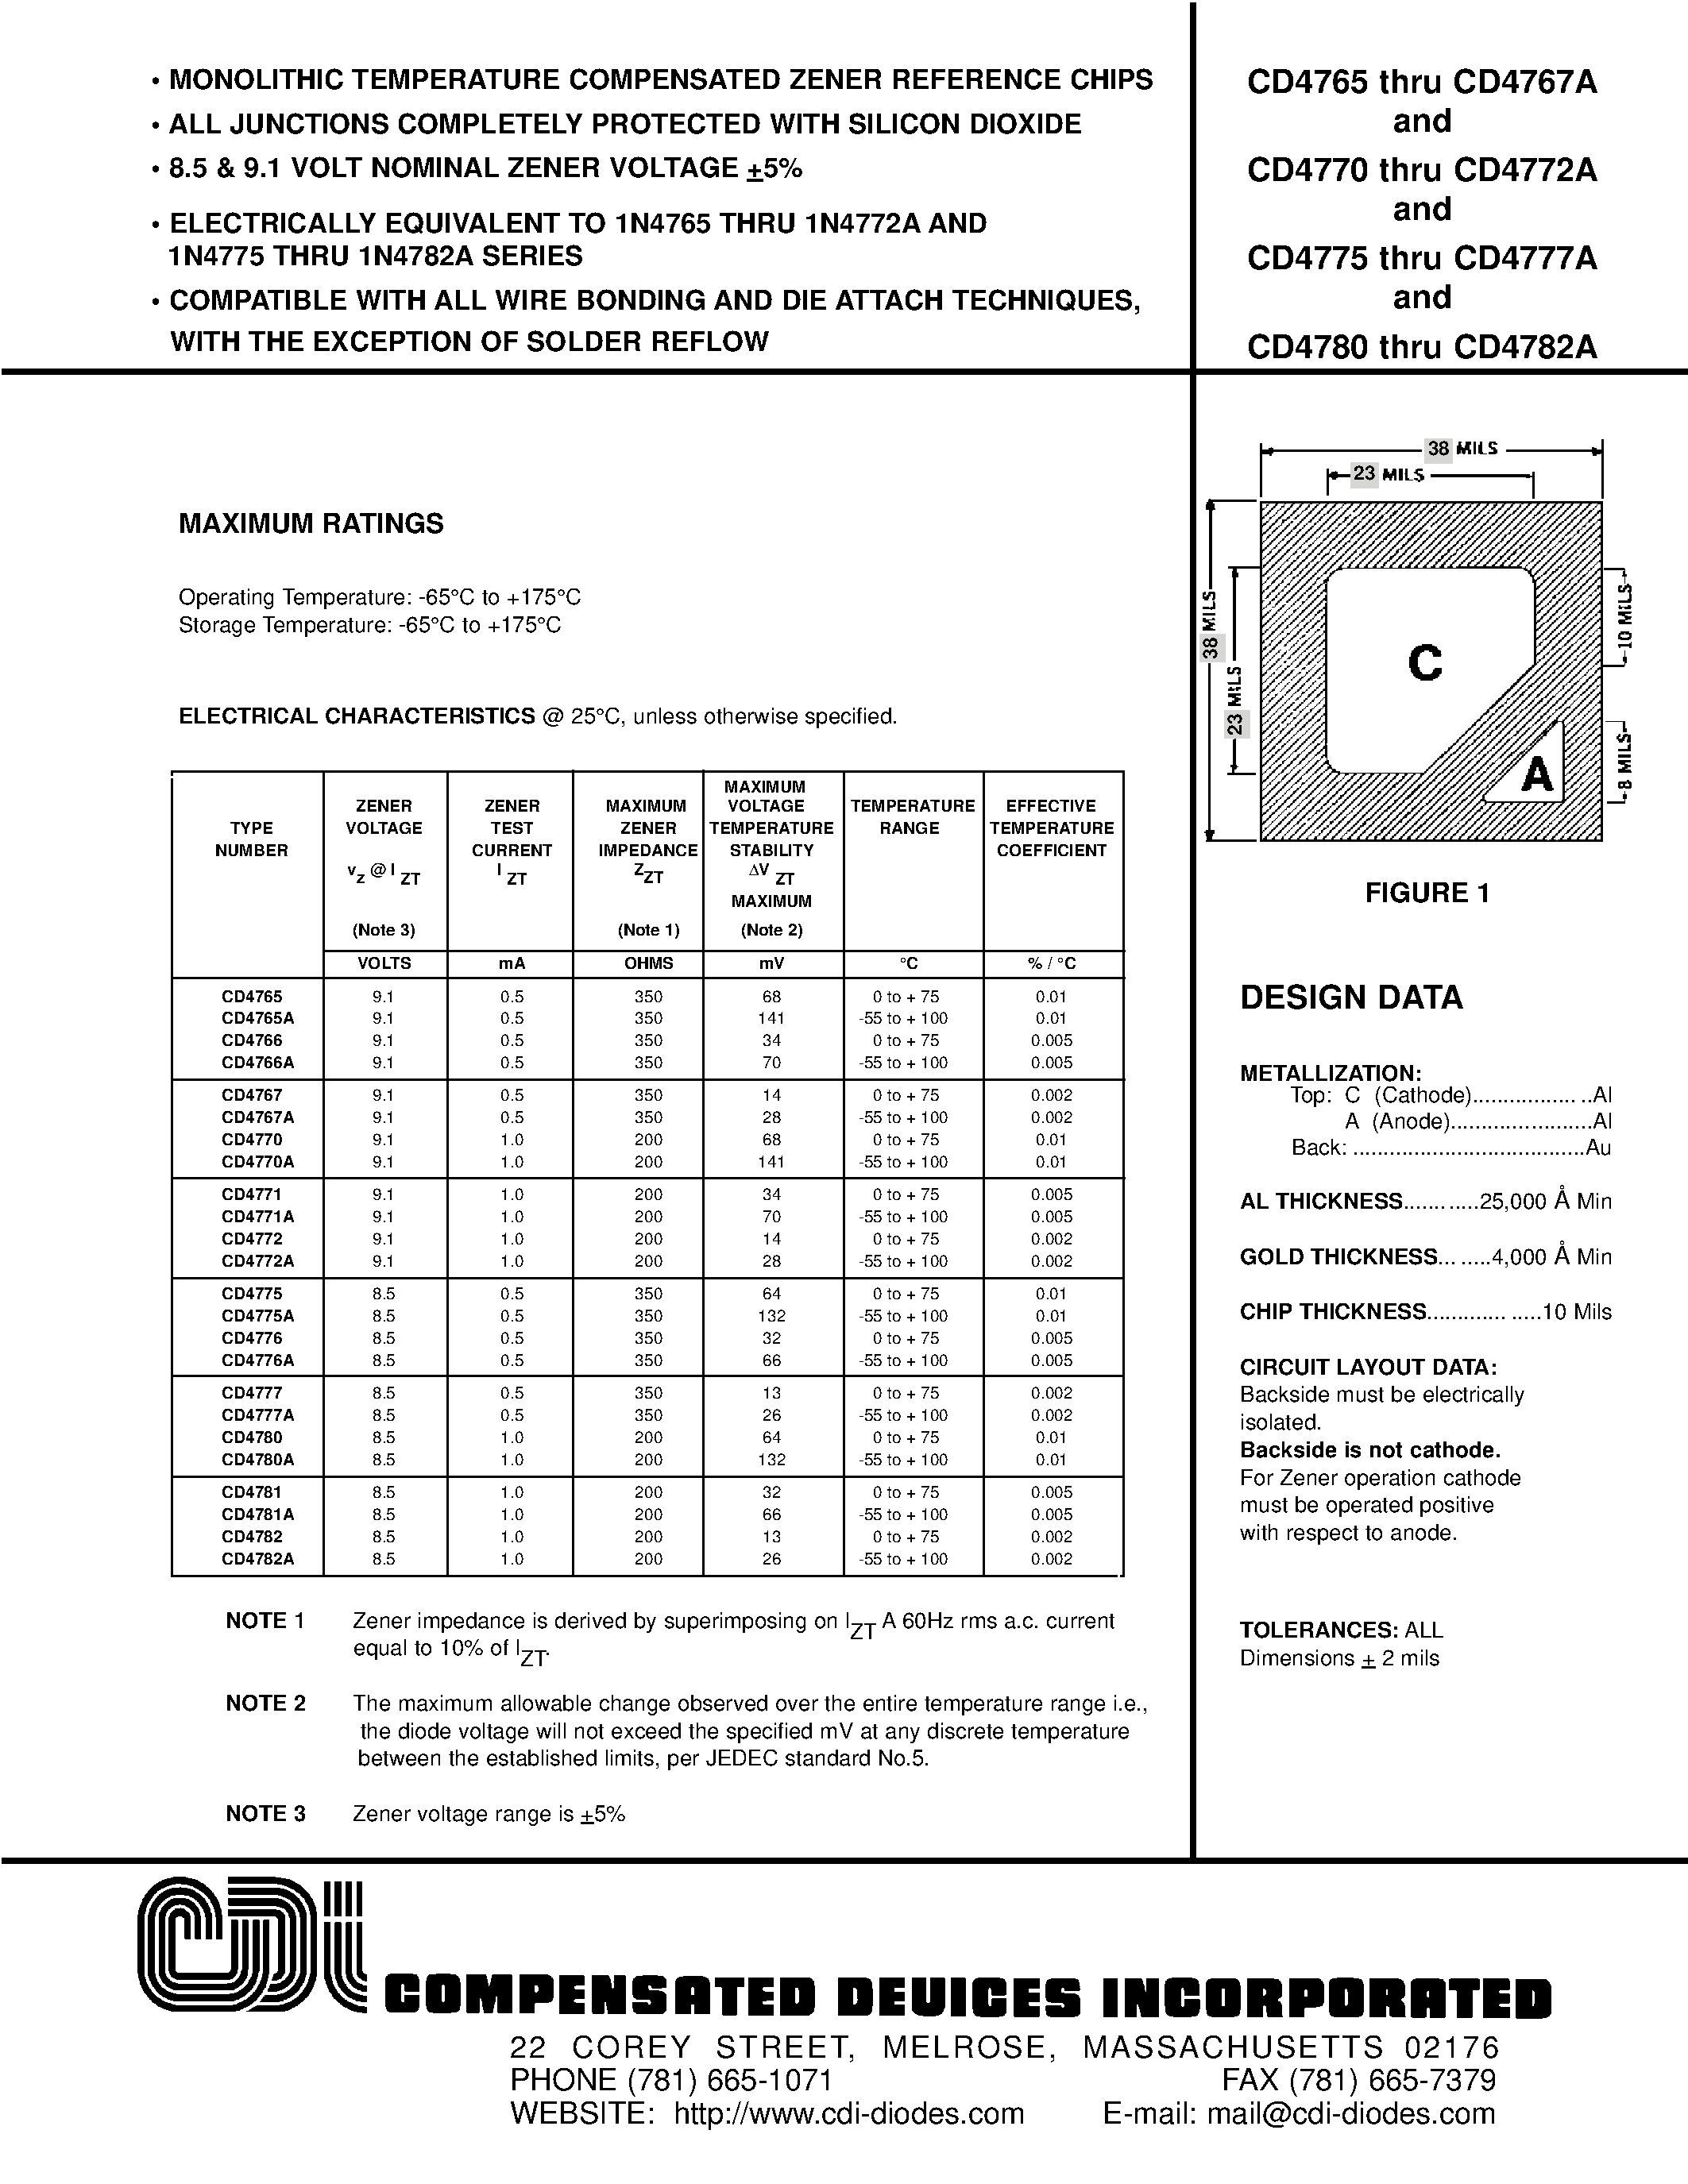 Datasheet CD4765 - MONOLITHIC TEMPERATURE COMPENSATED ZENER REFERENCE CHIPS page 1